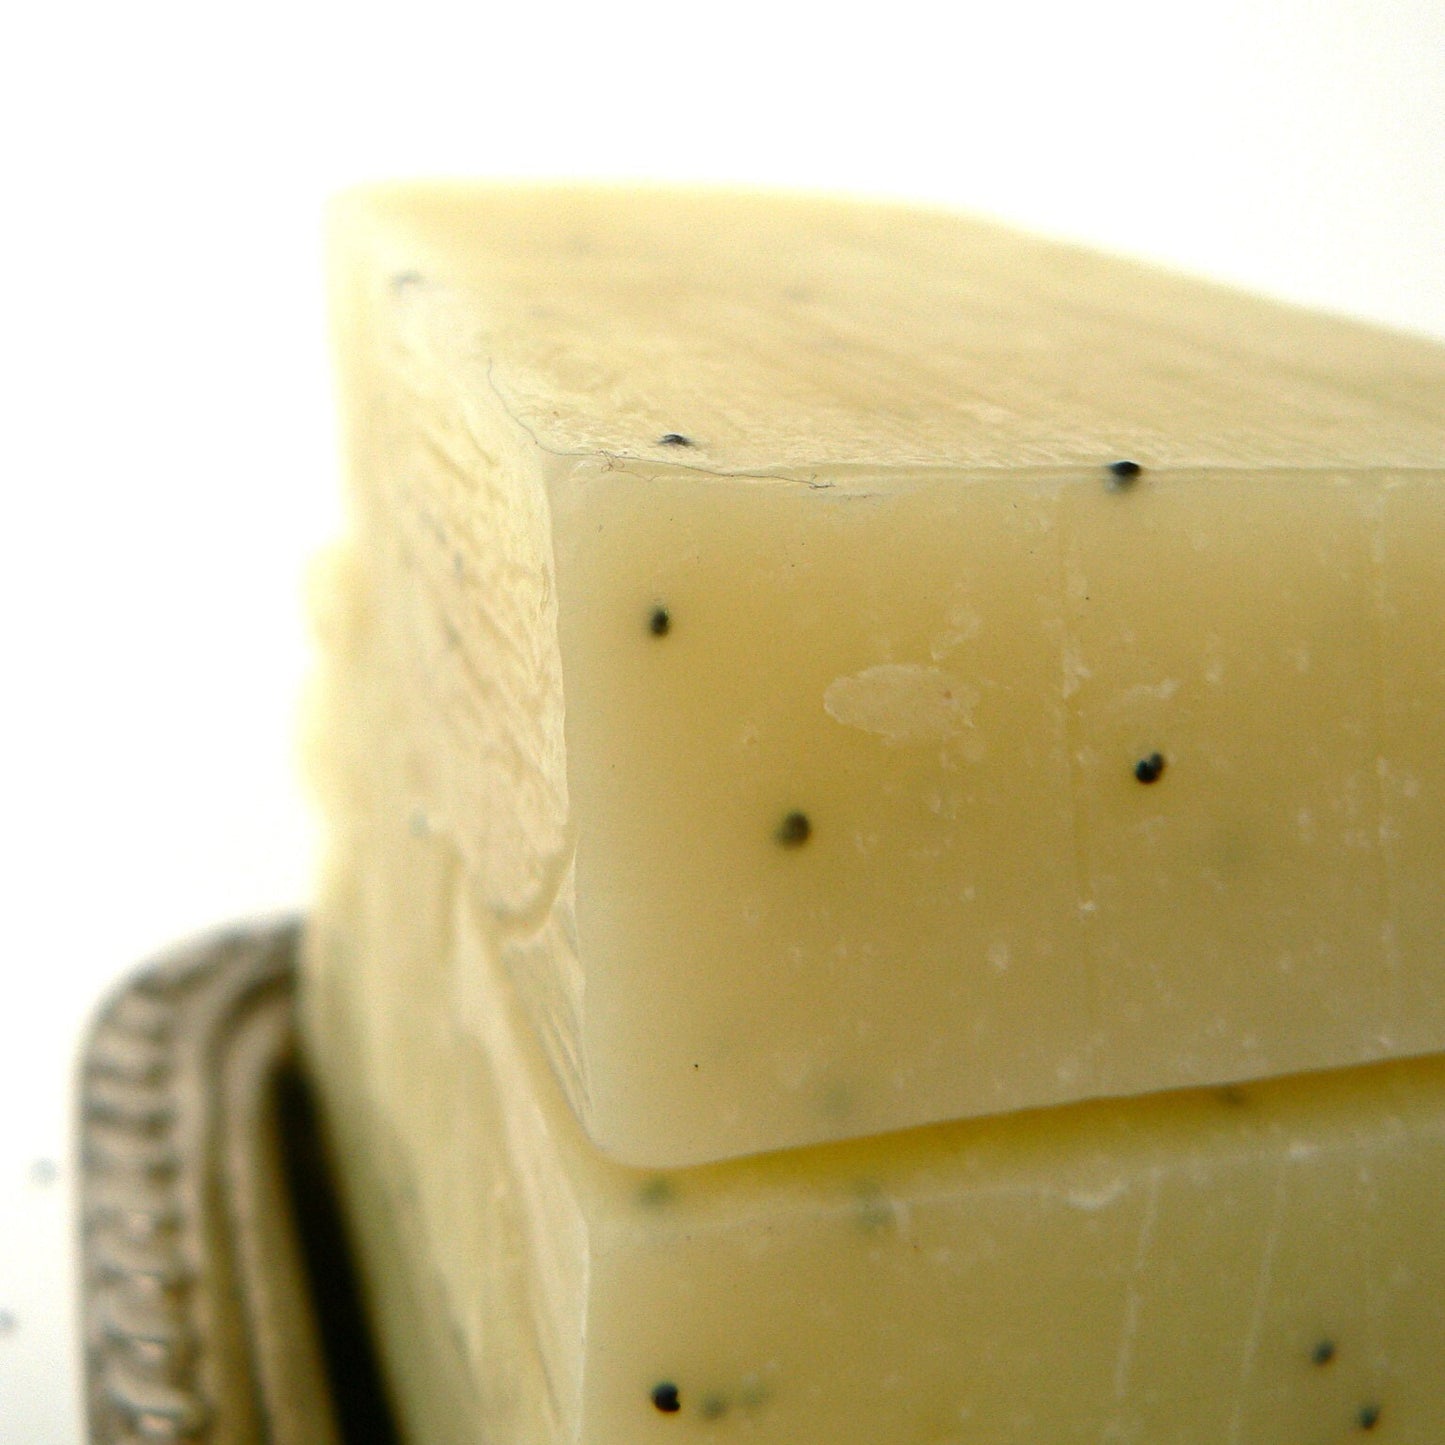 Peppermint & Teatree, Olive Oil Soap